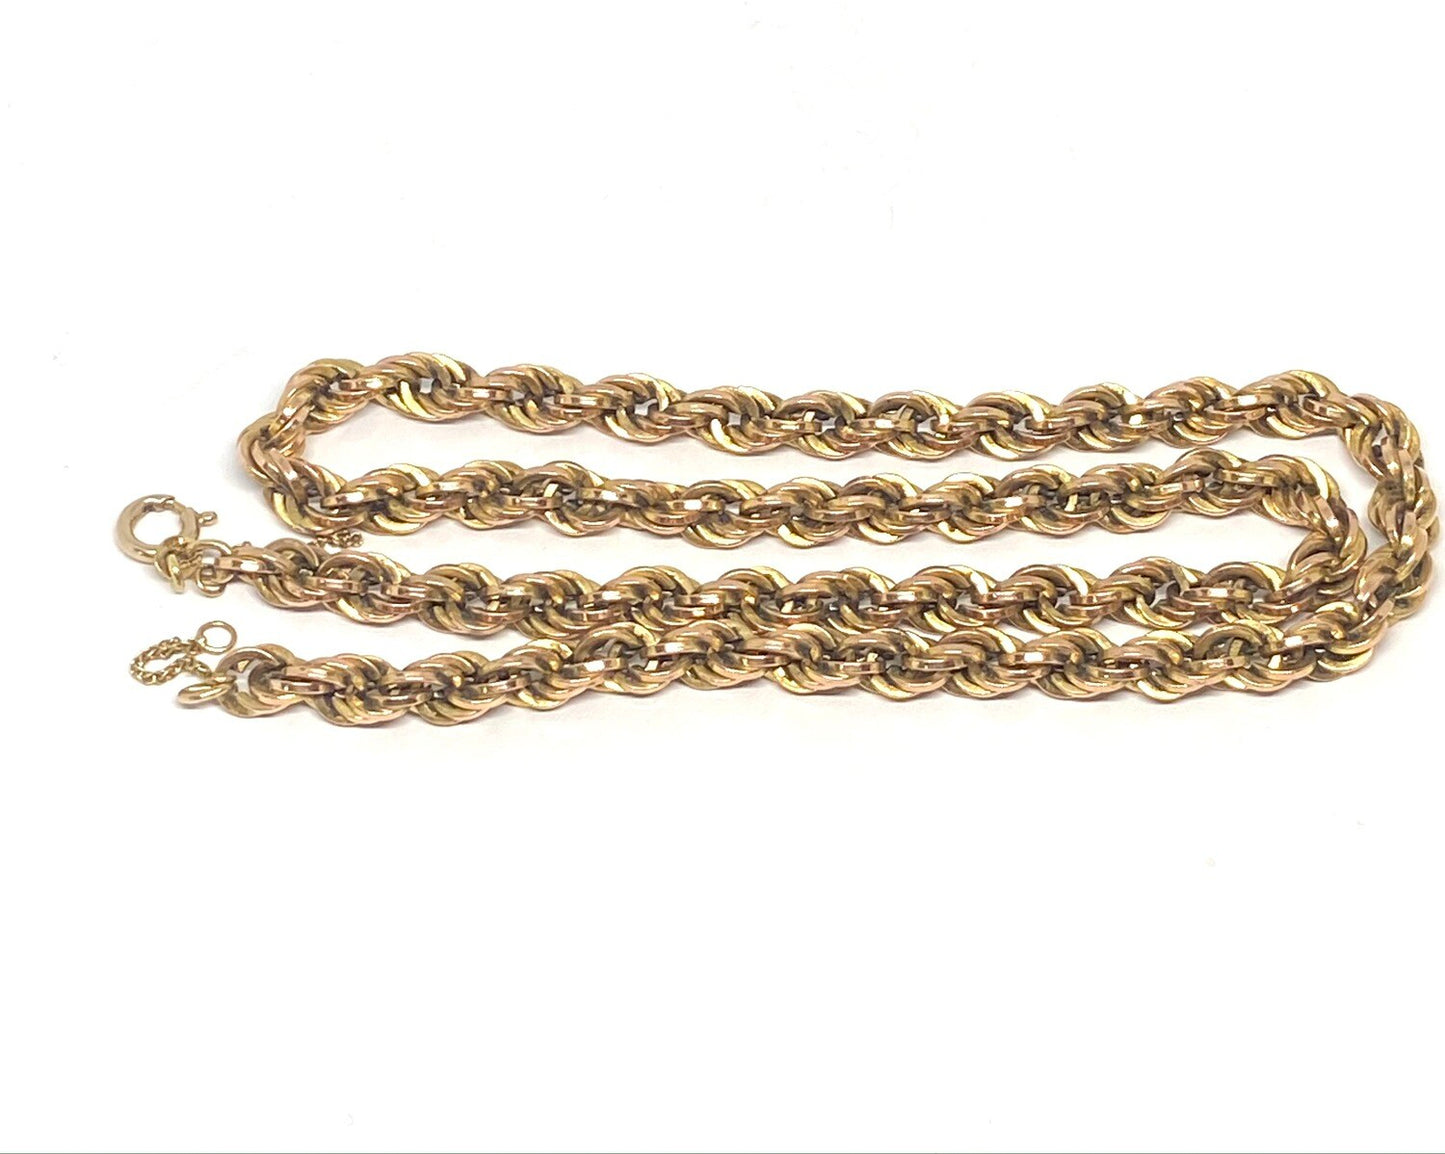 9ct vintage rose gold chunky rope link chain / necklace 19 inches 25g